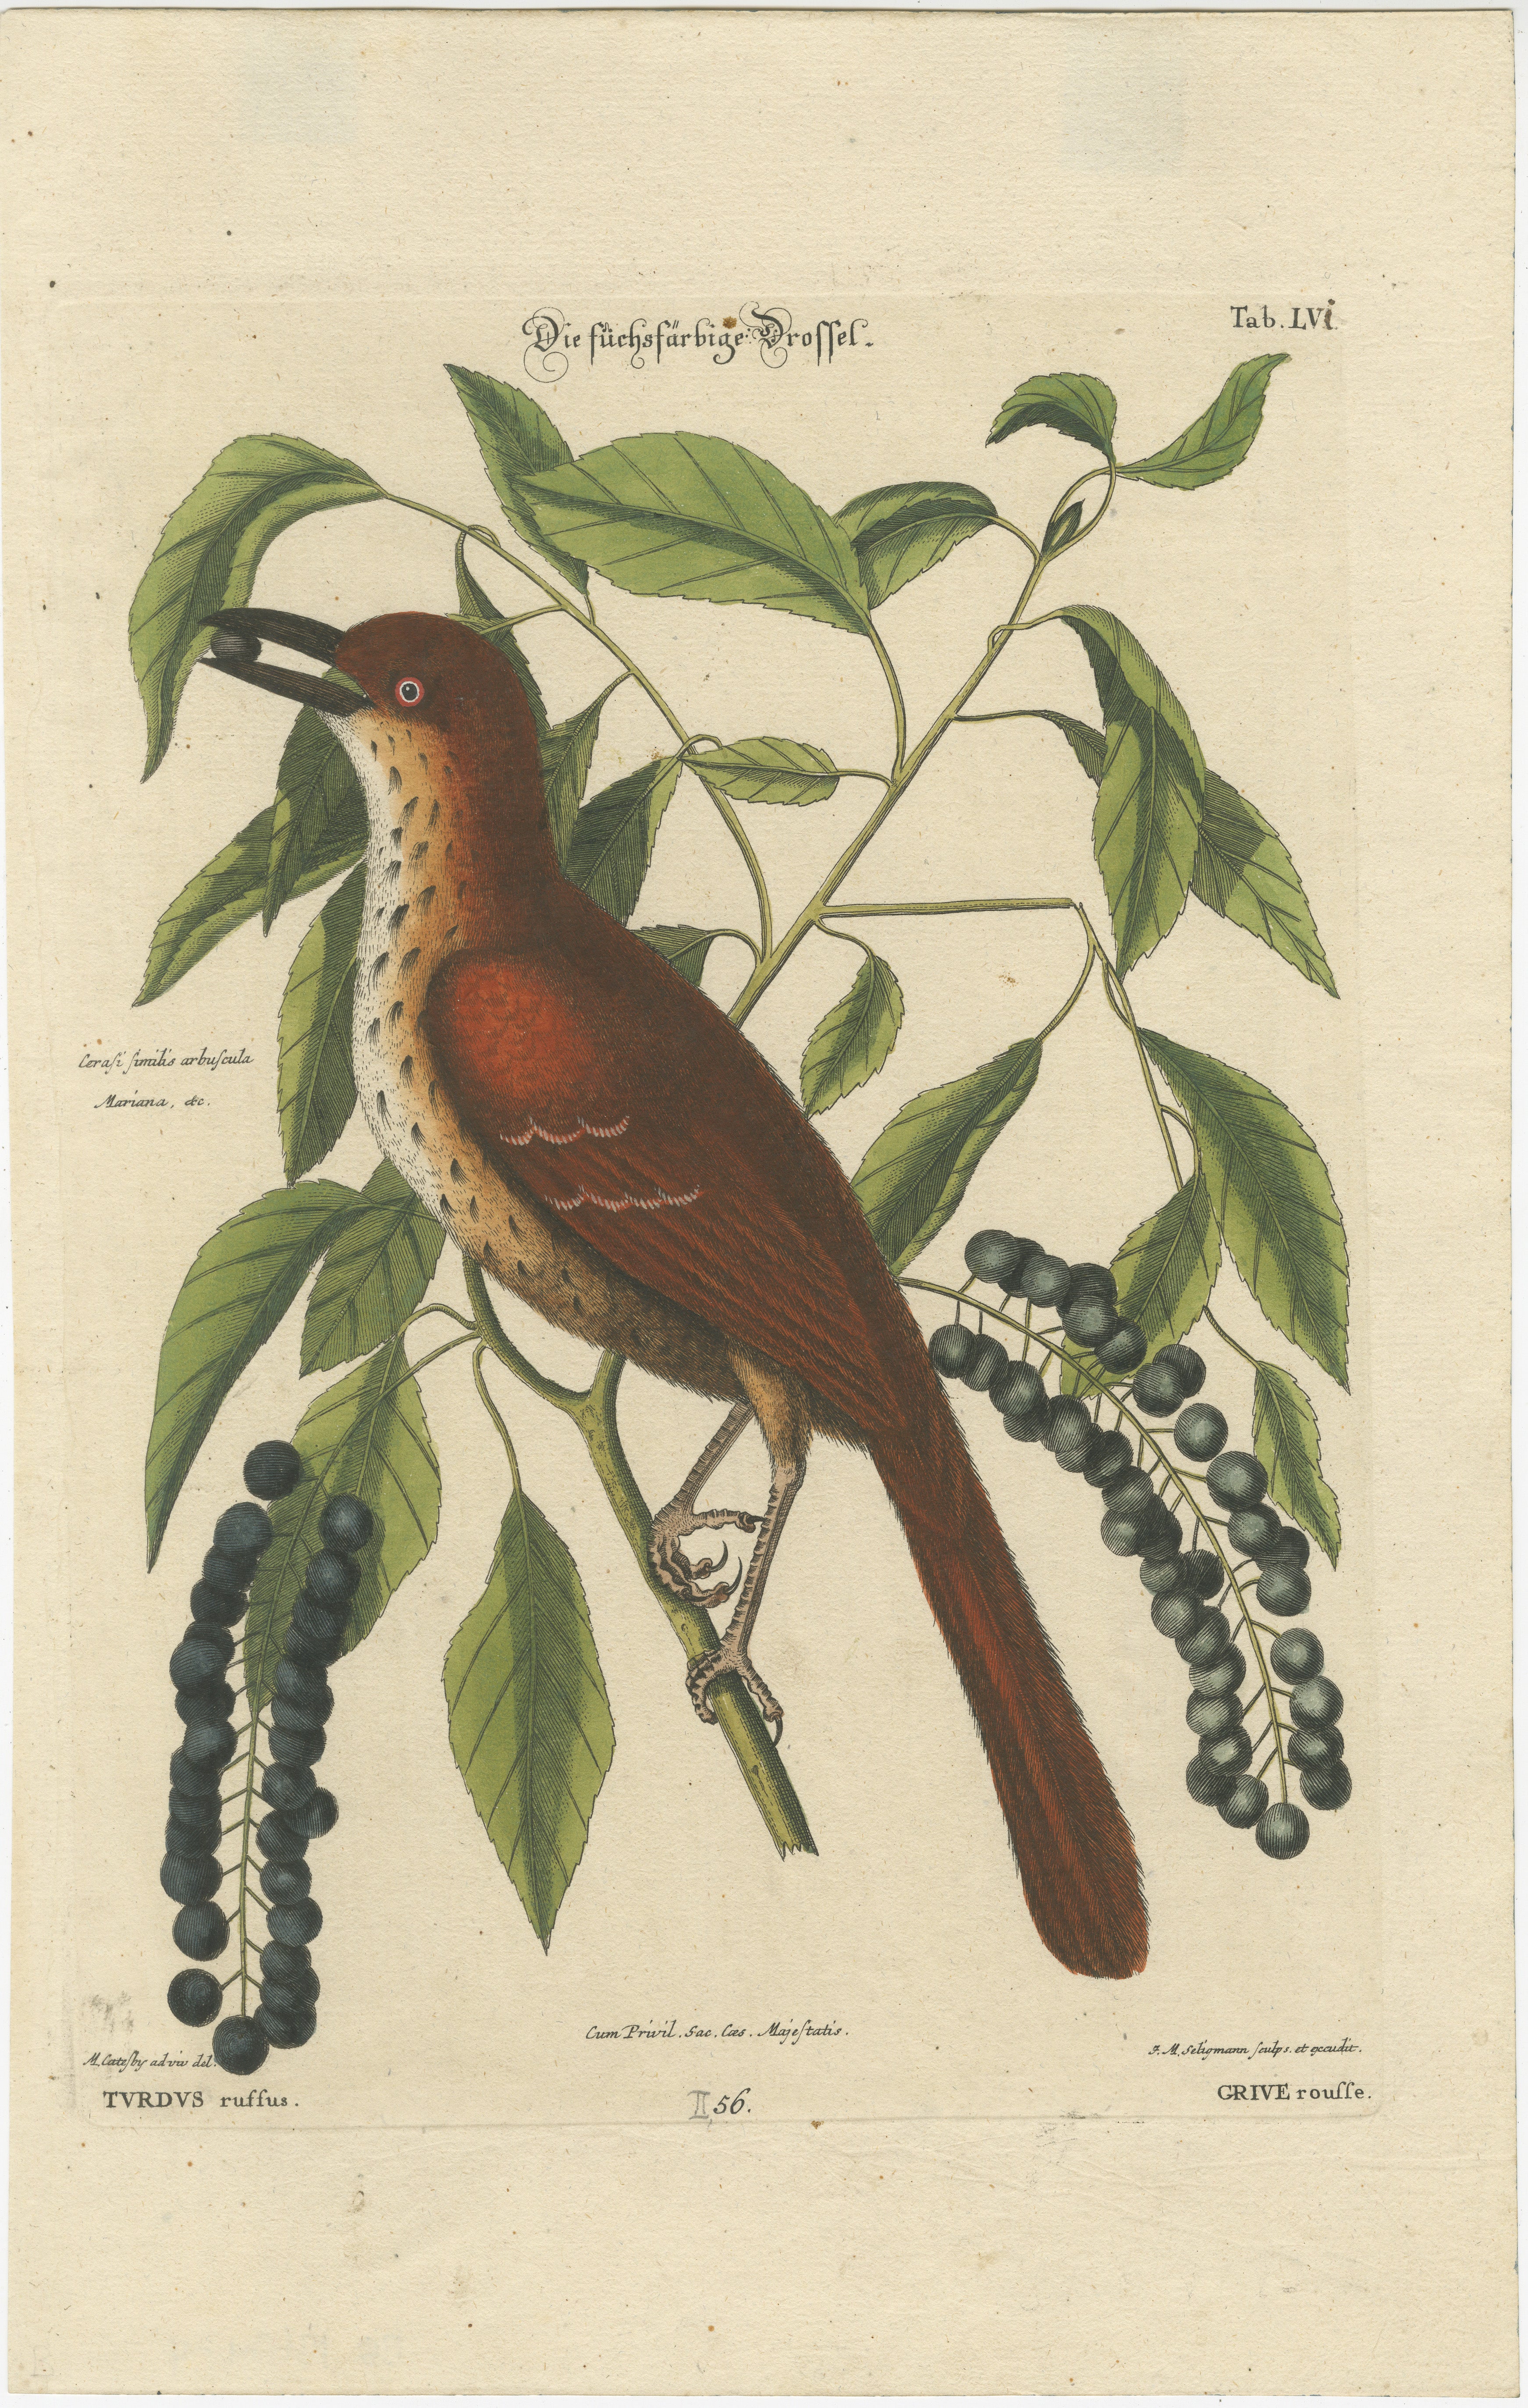 A beautiful hand-colored engraving from Johann Michael Seligmann's collection, which was based on the earlier works of George Edwards. 

The text on this image is in German, Latin, and French, which were commonly used languages in scientific texts